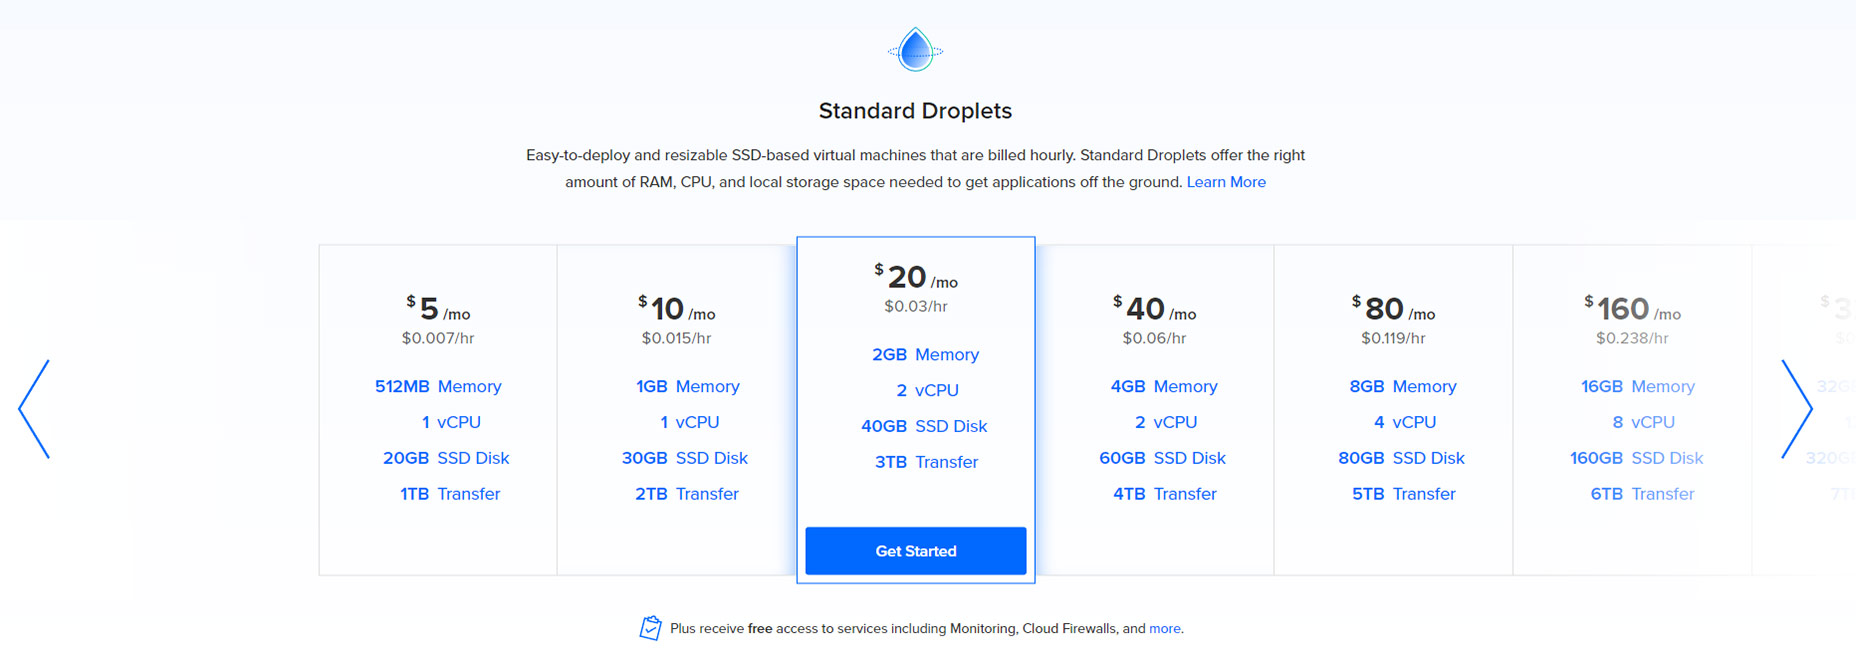 04-standard-droplets-pricing-table